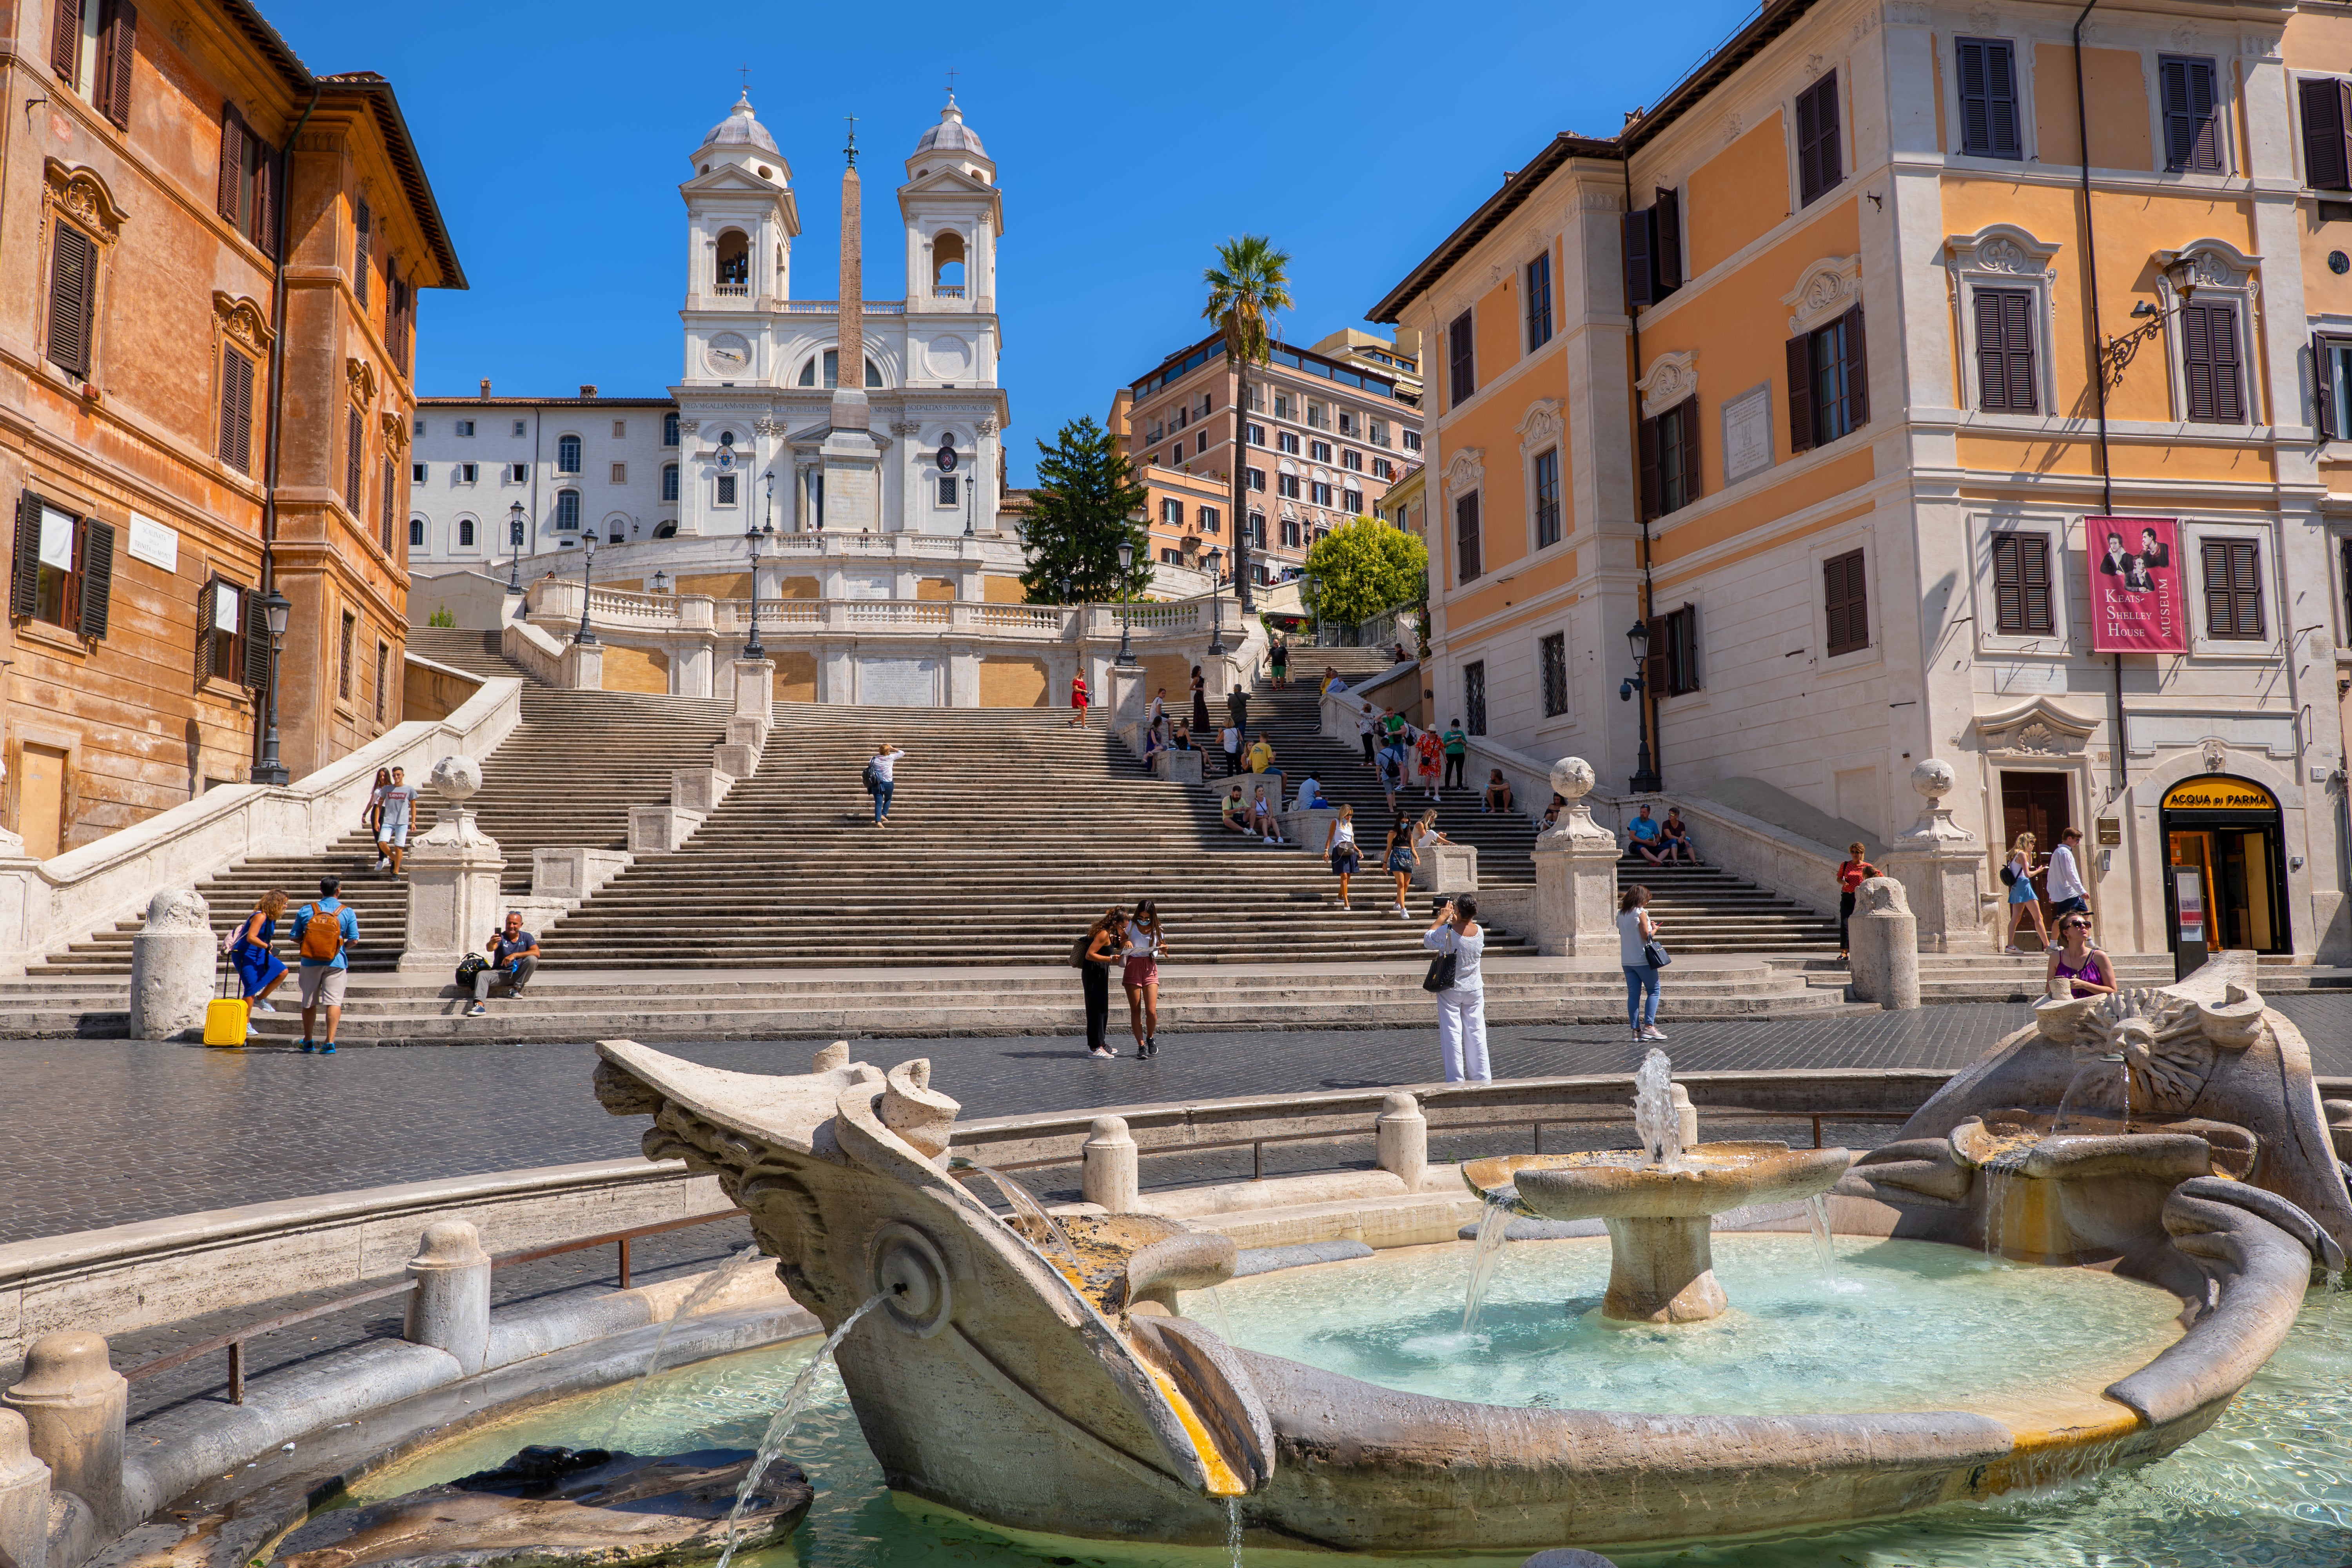 British tourist fined €500 for breaking strict fountain rule in Rome